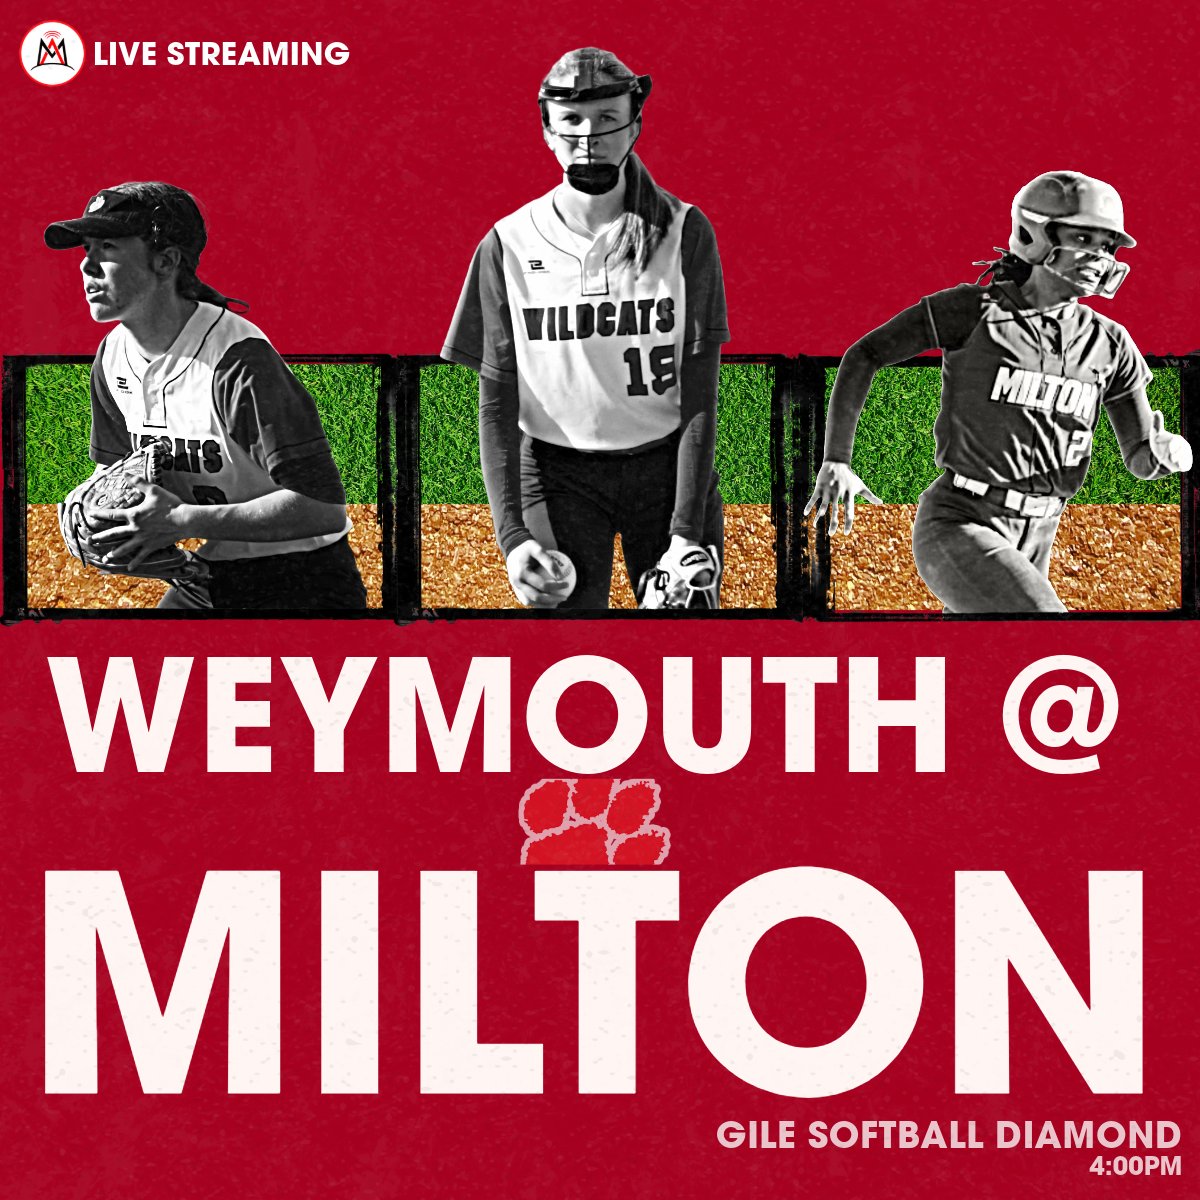 The Cats have been ON FIRE all season long. 🔥 See if they can keep it rolling against Weymouth, LIVE on MATV tomorrow at 4pm: youtube.com/@miltonaccesstv #ROLLCATS #MiltonMa #MiltonMass #softball